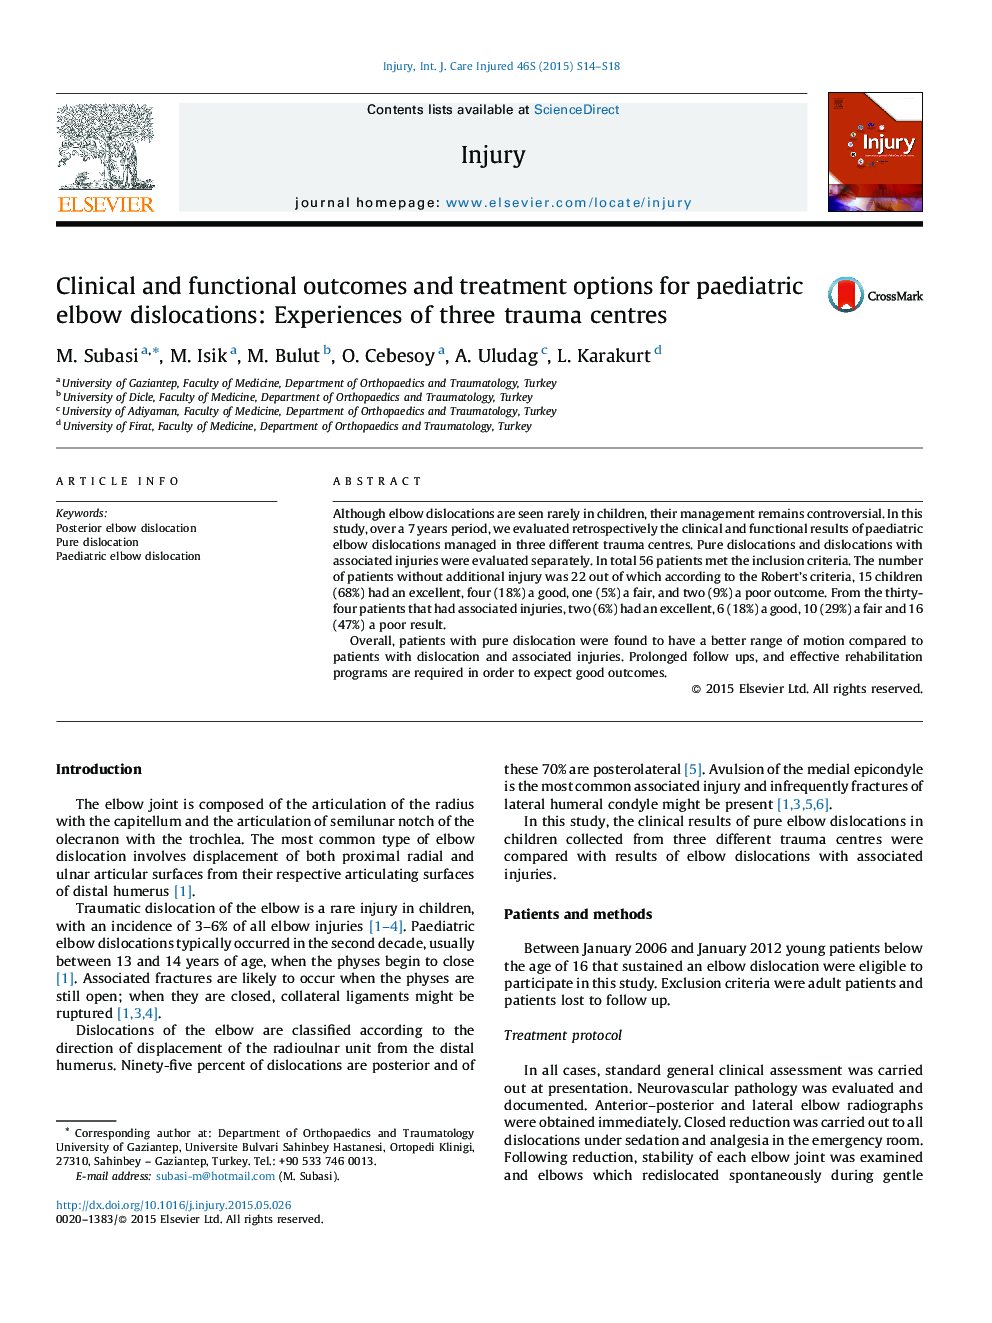 Clinical and functional outcomes and treatment options for paediatric elbow dislocations: Experiences of three trauma centres